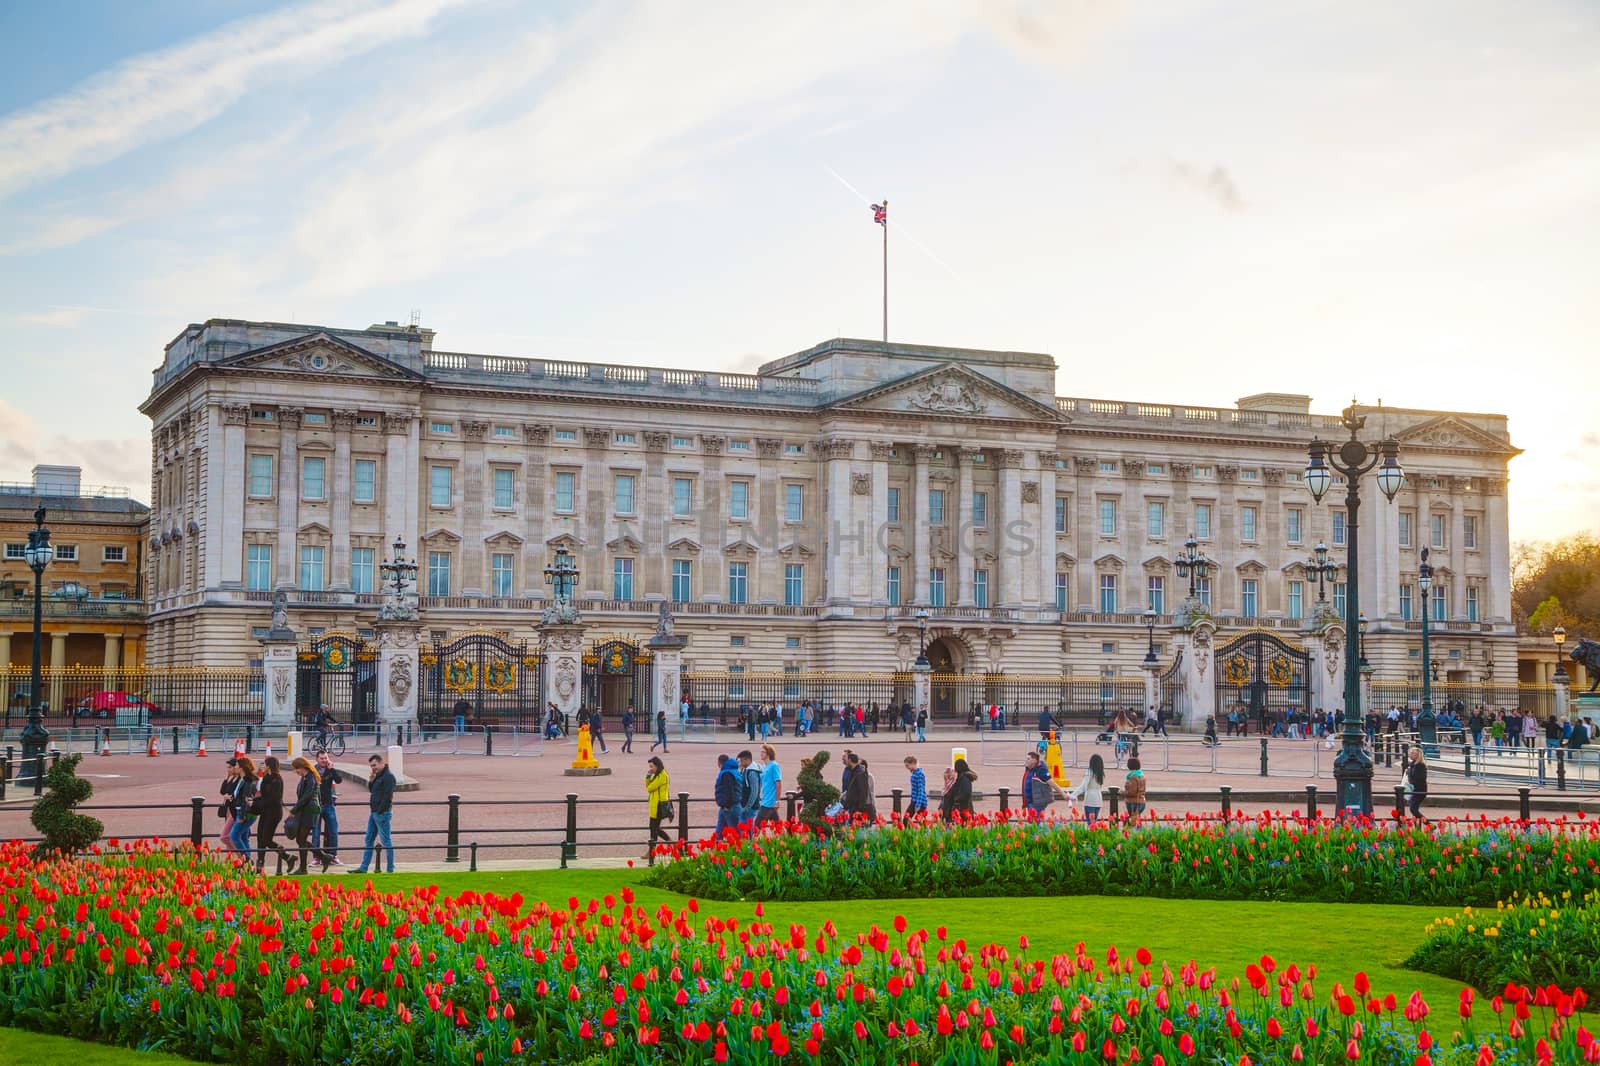 LONDON - APRIL 12: Buckingham palace at sunset on April 12, 2015 in London, UK. It's the London residence and principal workplace of the monarchy of the United Kingdom.